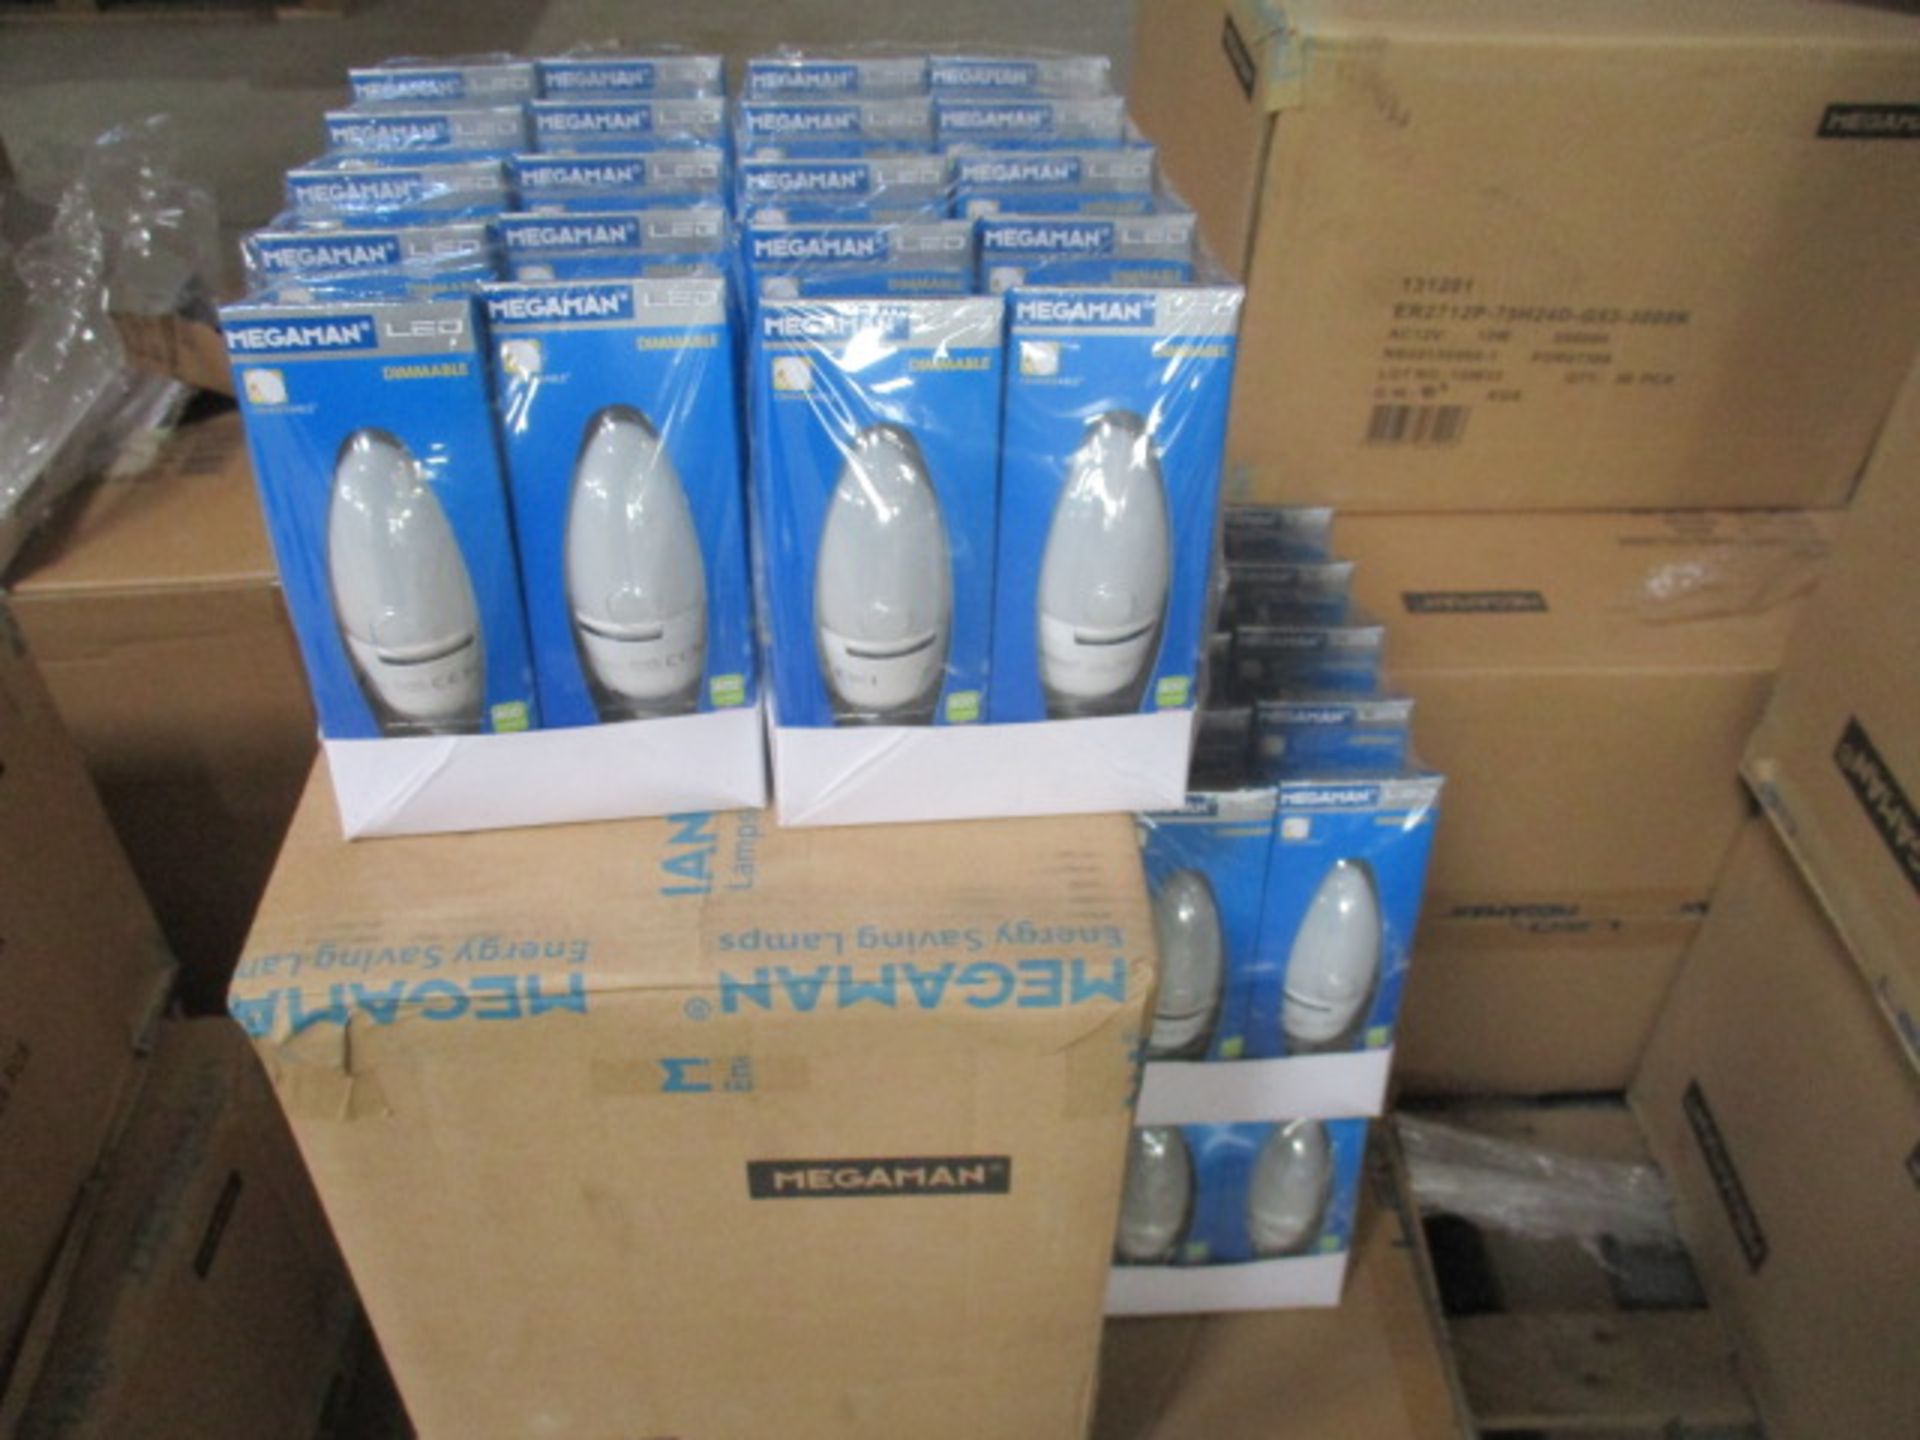 Approx. 10,000 Brand New Megaman LED Bulbs | Approx RRP £50,000+ - Image 24 of 30